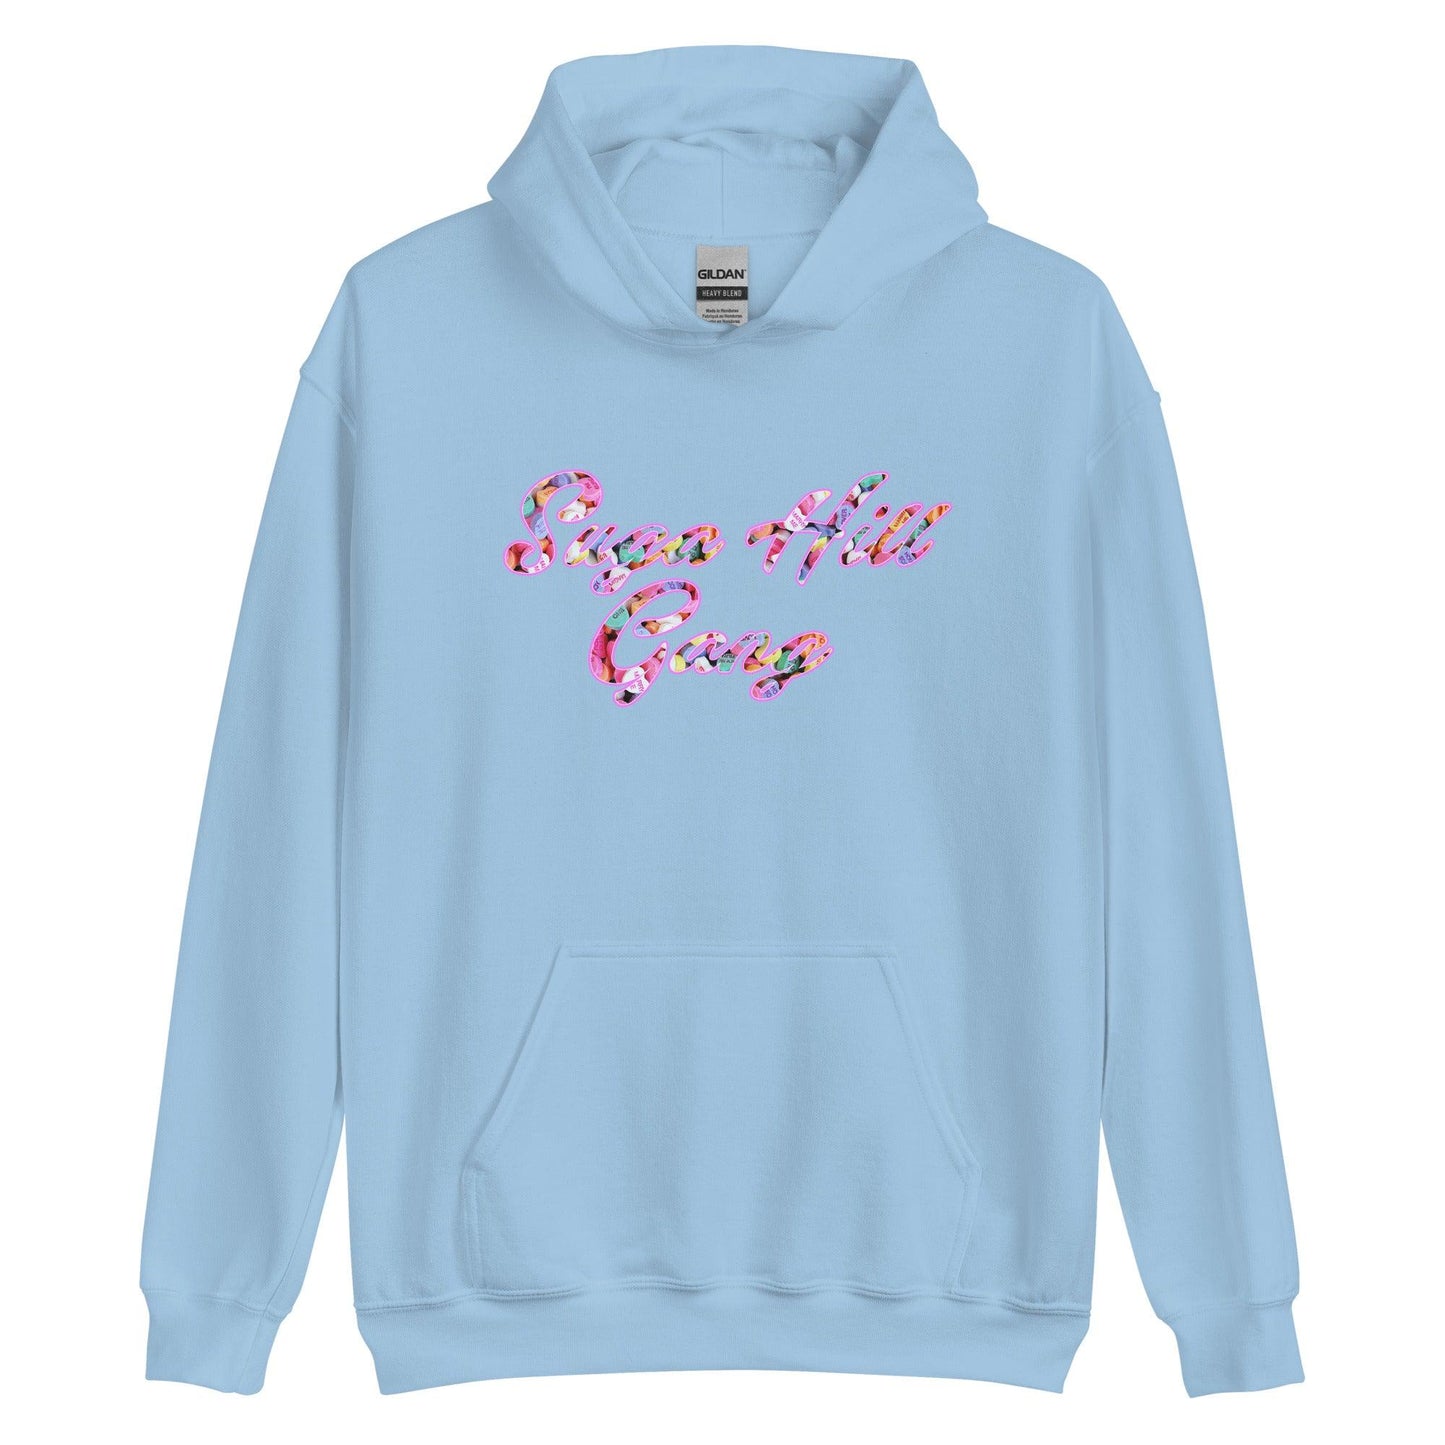 Jyaire Hill "Signature" Hoodie - Fan Arch